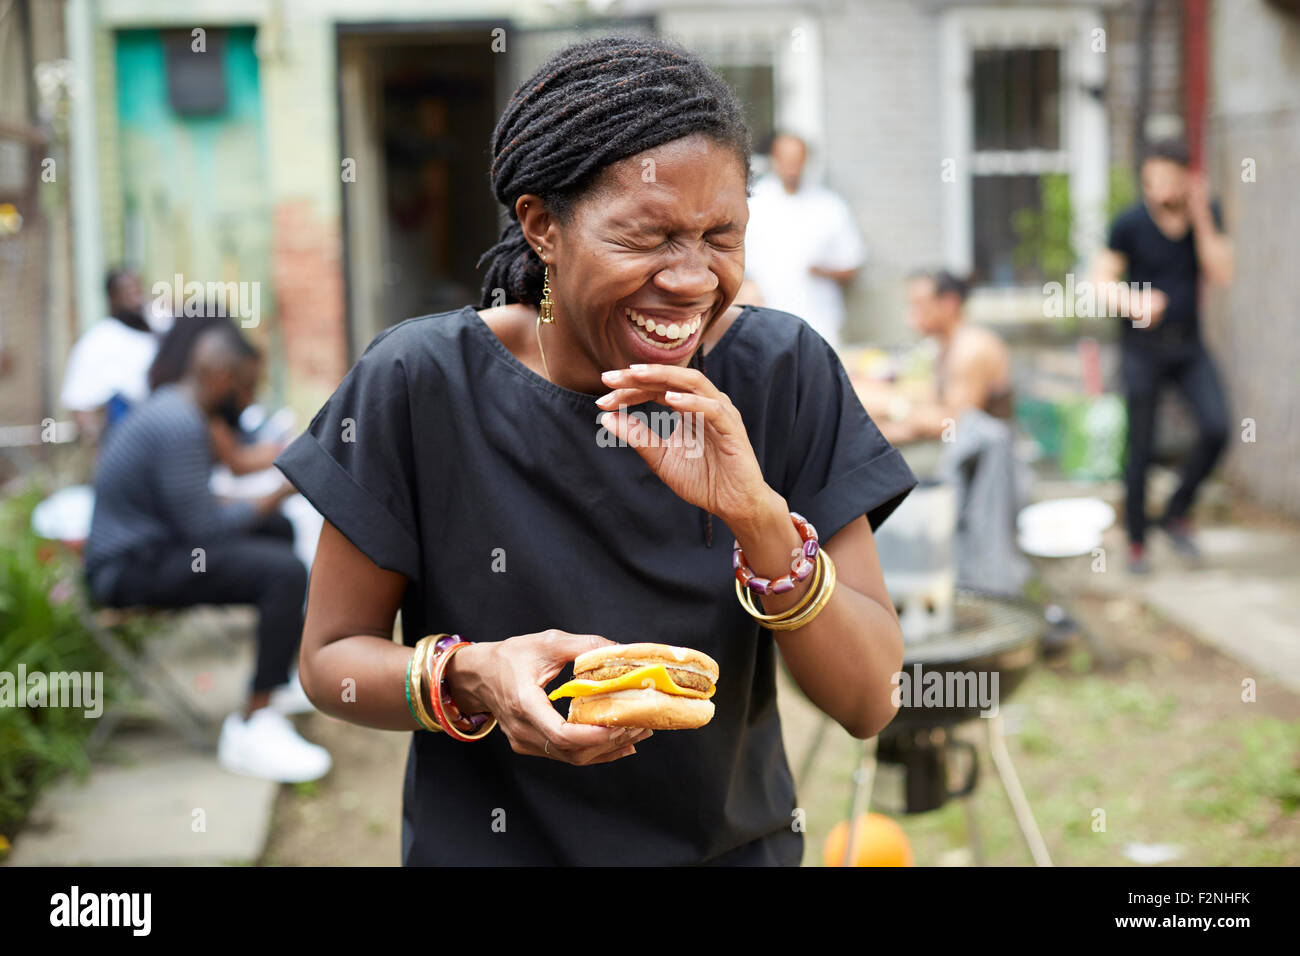 African American Woman eating at backyard barbecue Banque D'Images